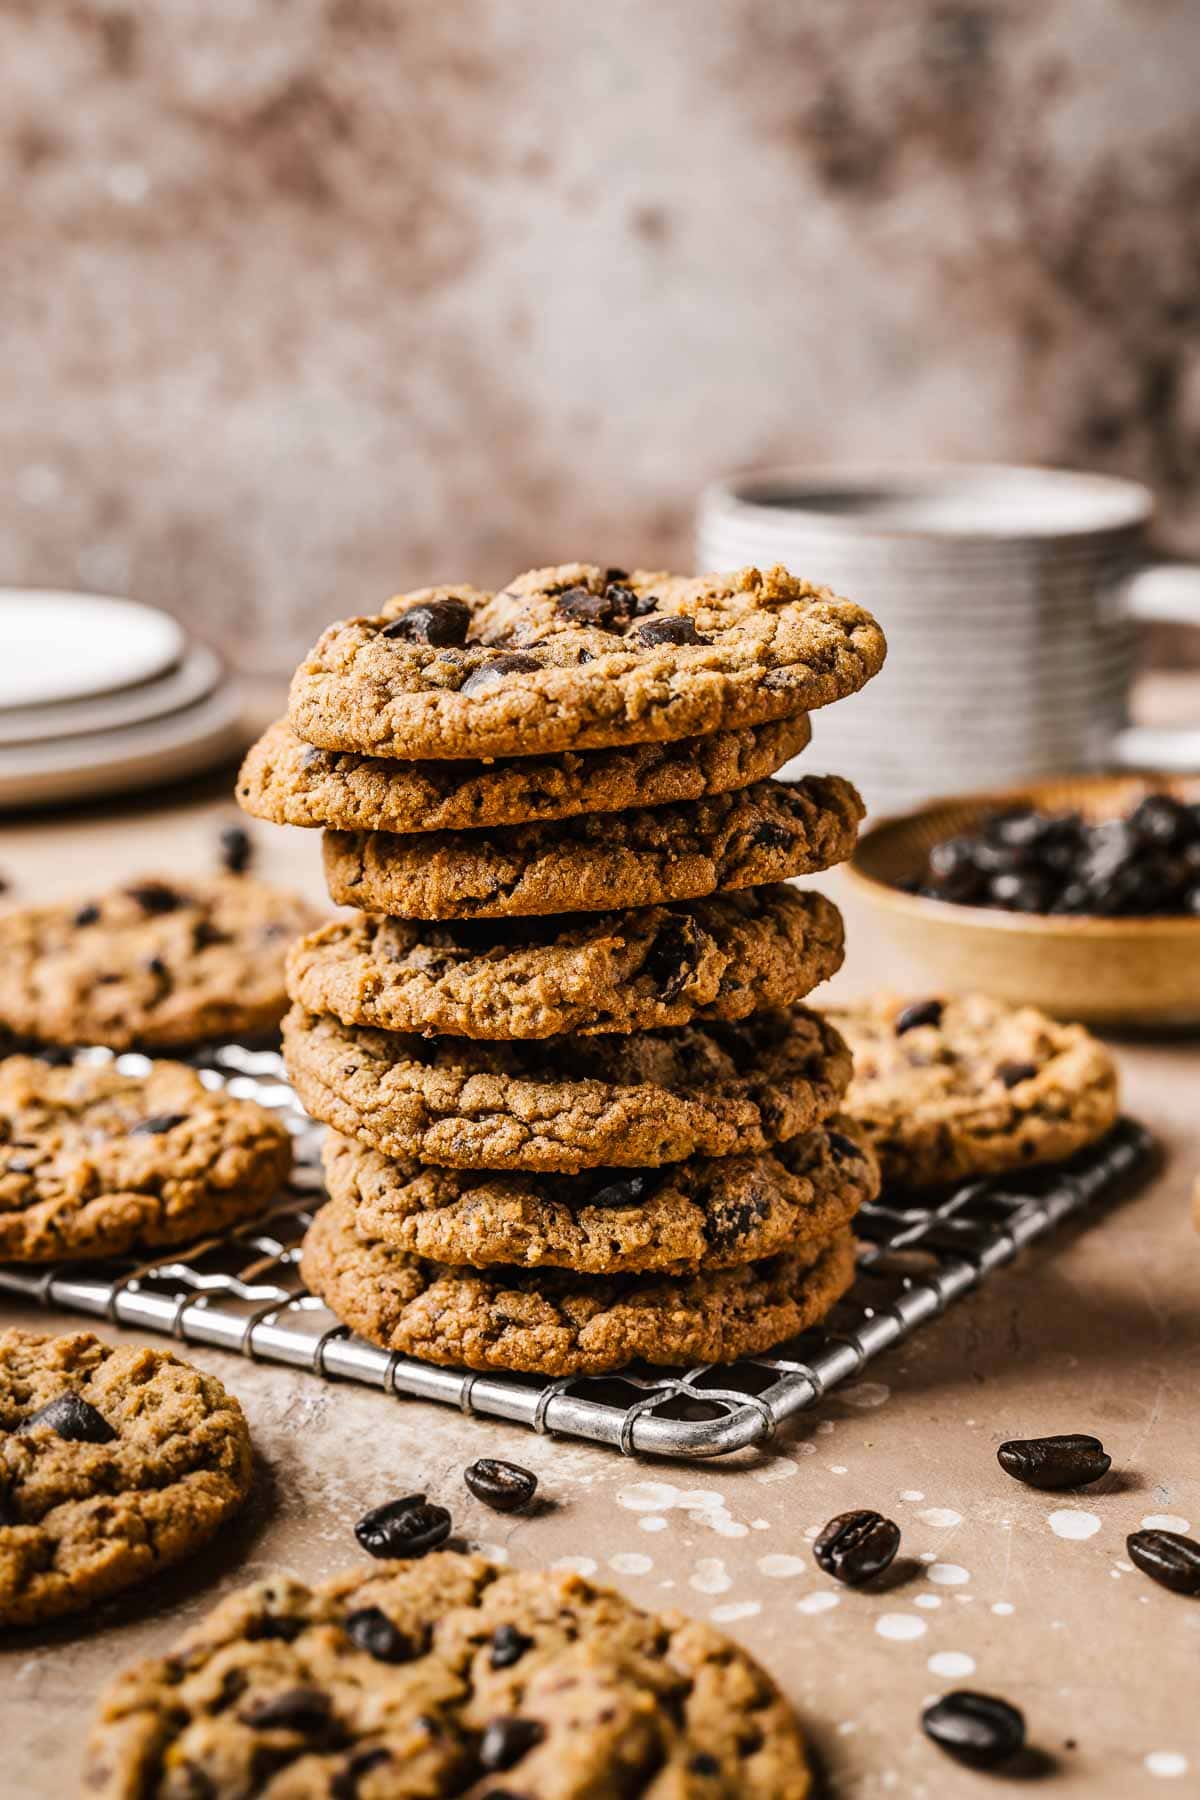 A stack of seven brown cookies on a metal cooling rack with coffee beans in a small bowl and scattered nearby.